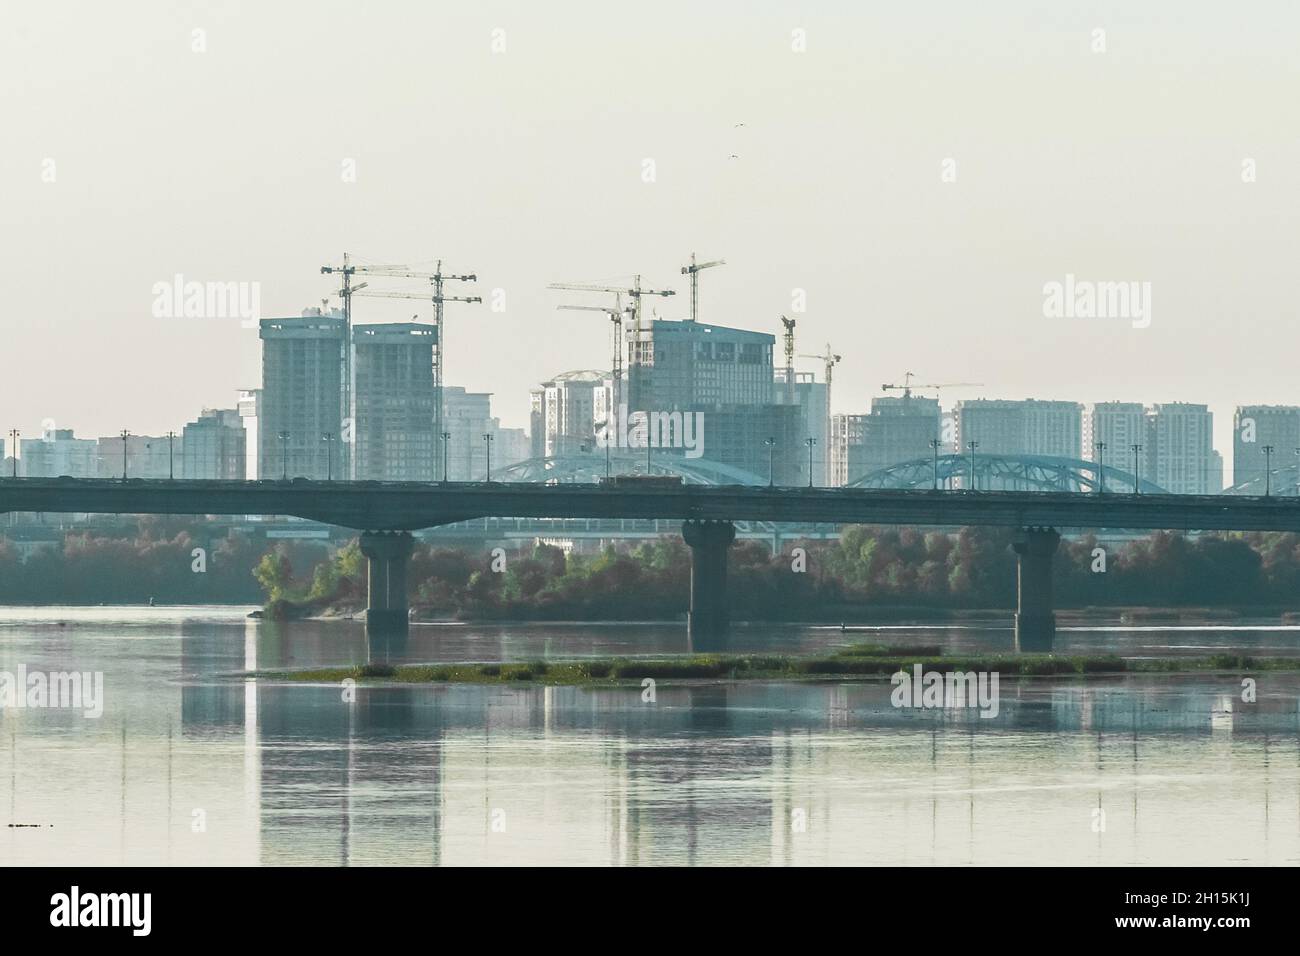 A large bridge to the city across the river against the backdrop of the cityscape and urban landscape architecture. Stock Photo